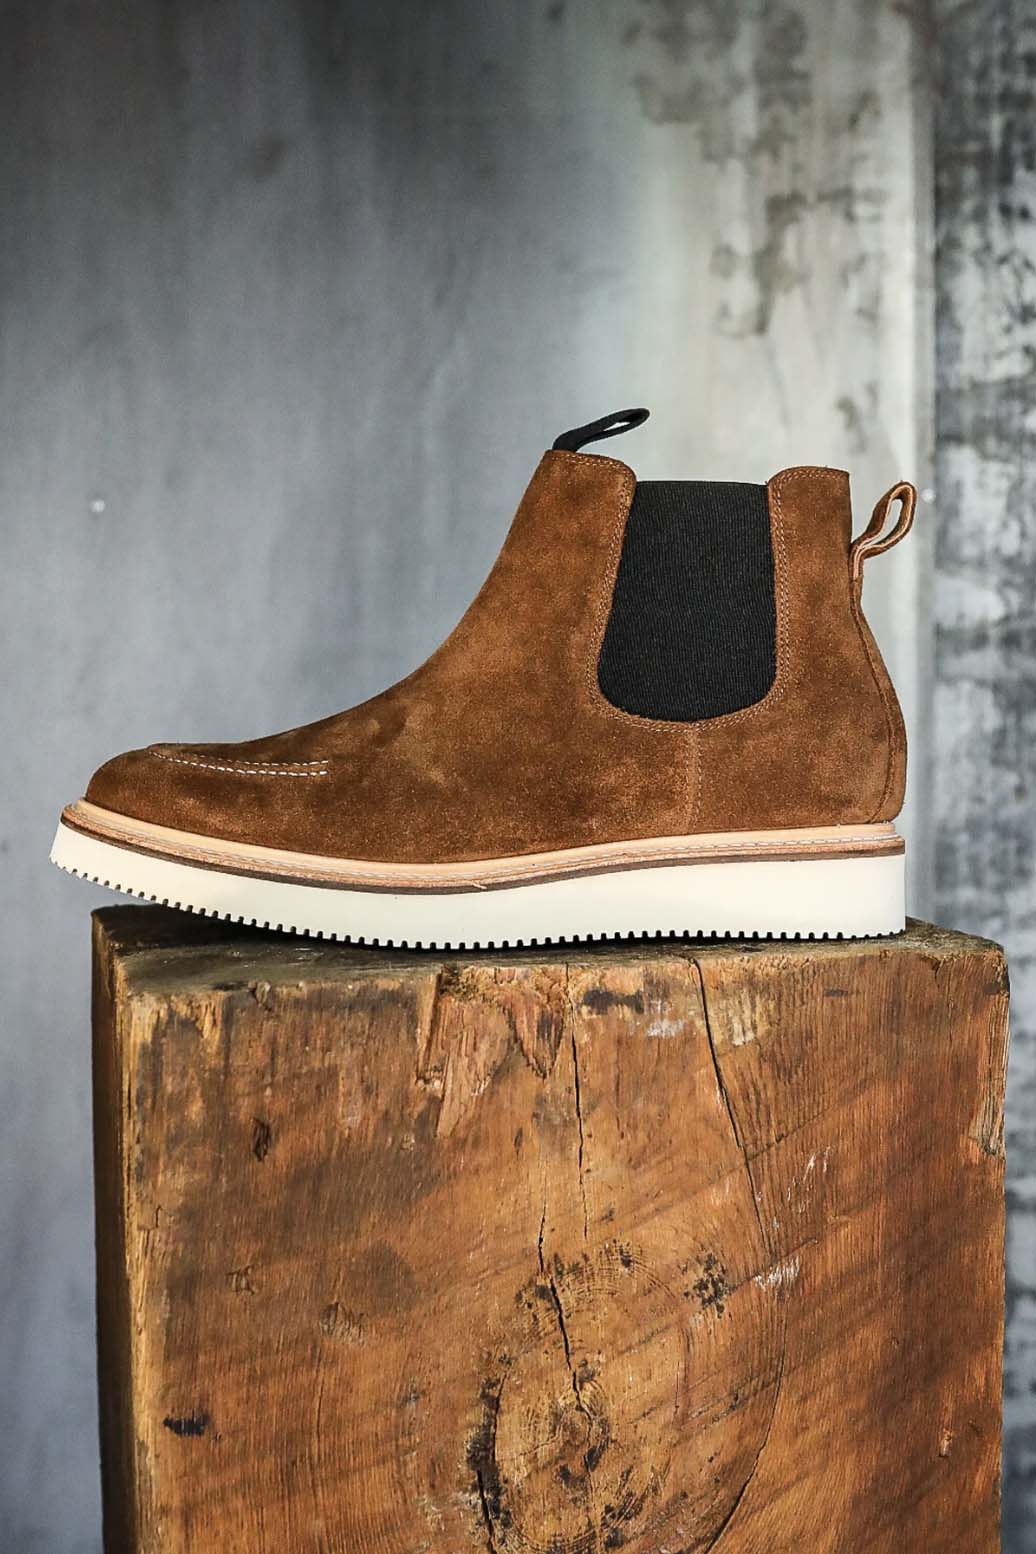 Why Chelsea Boots?